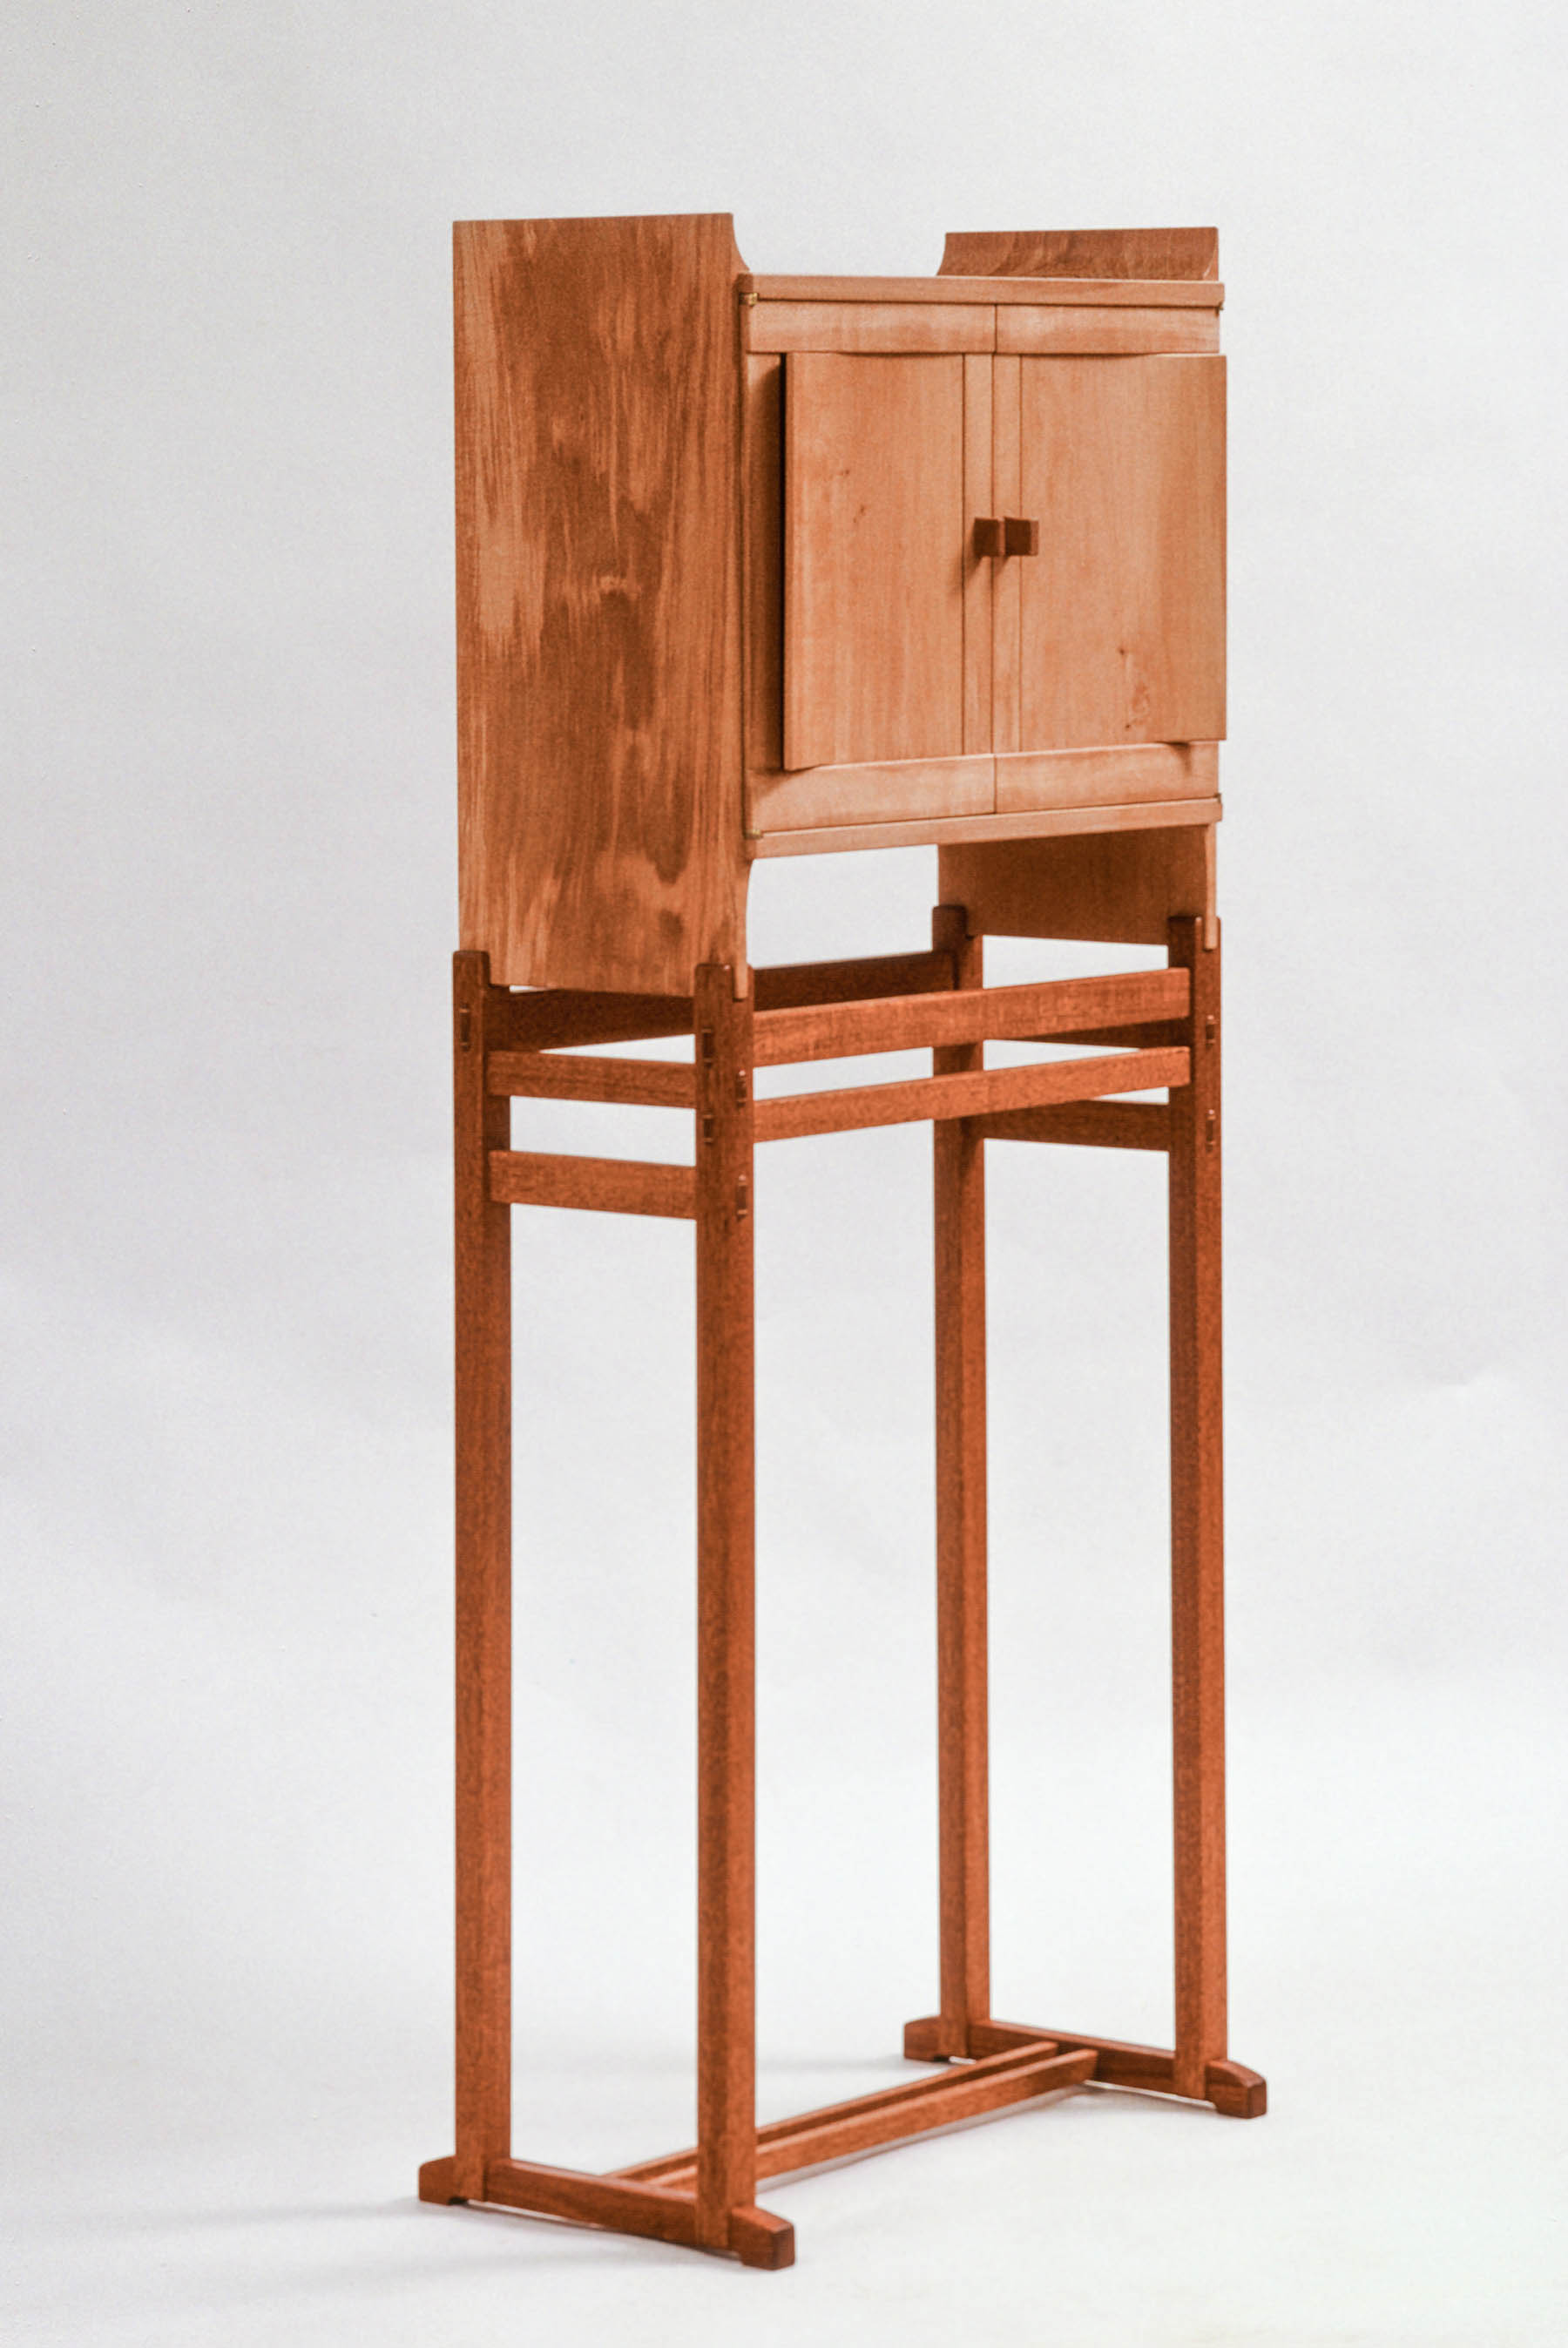 Owl Cabinet in Pear Wood